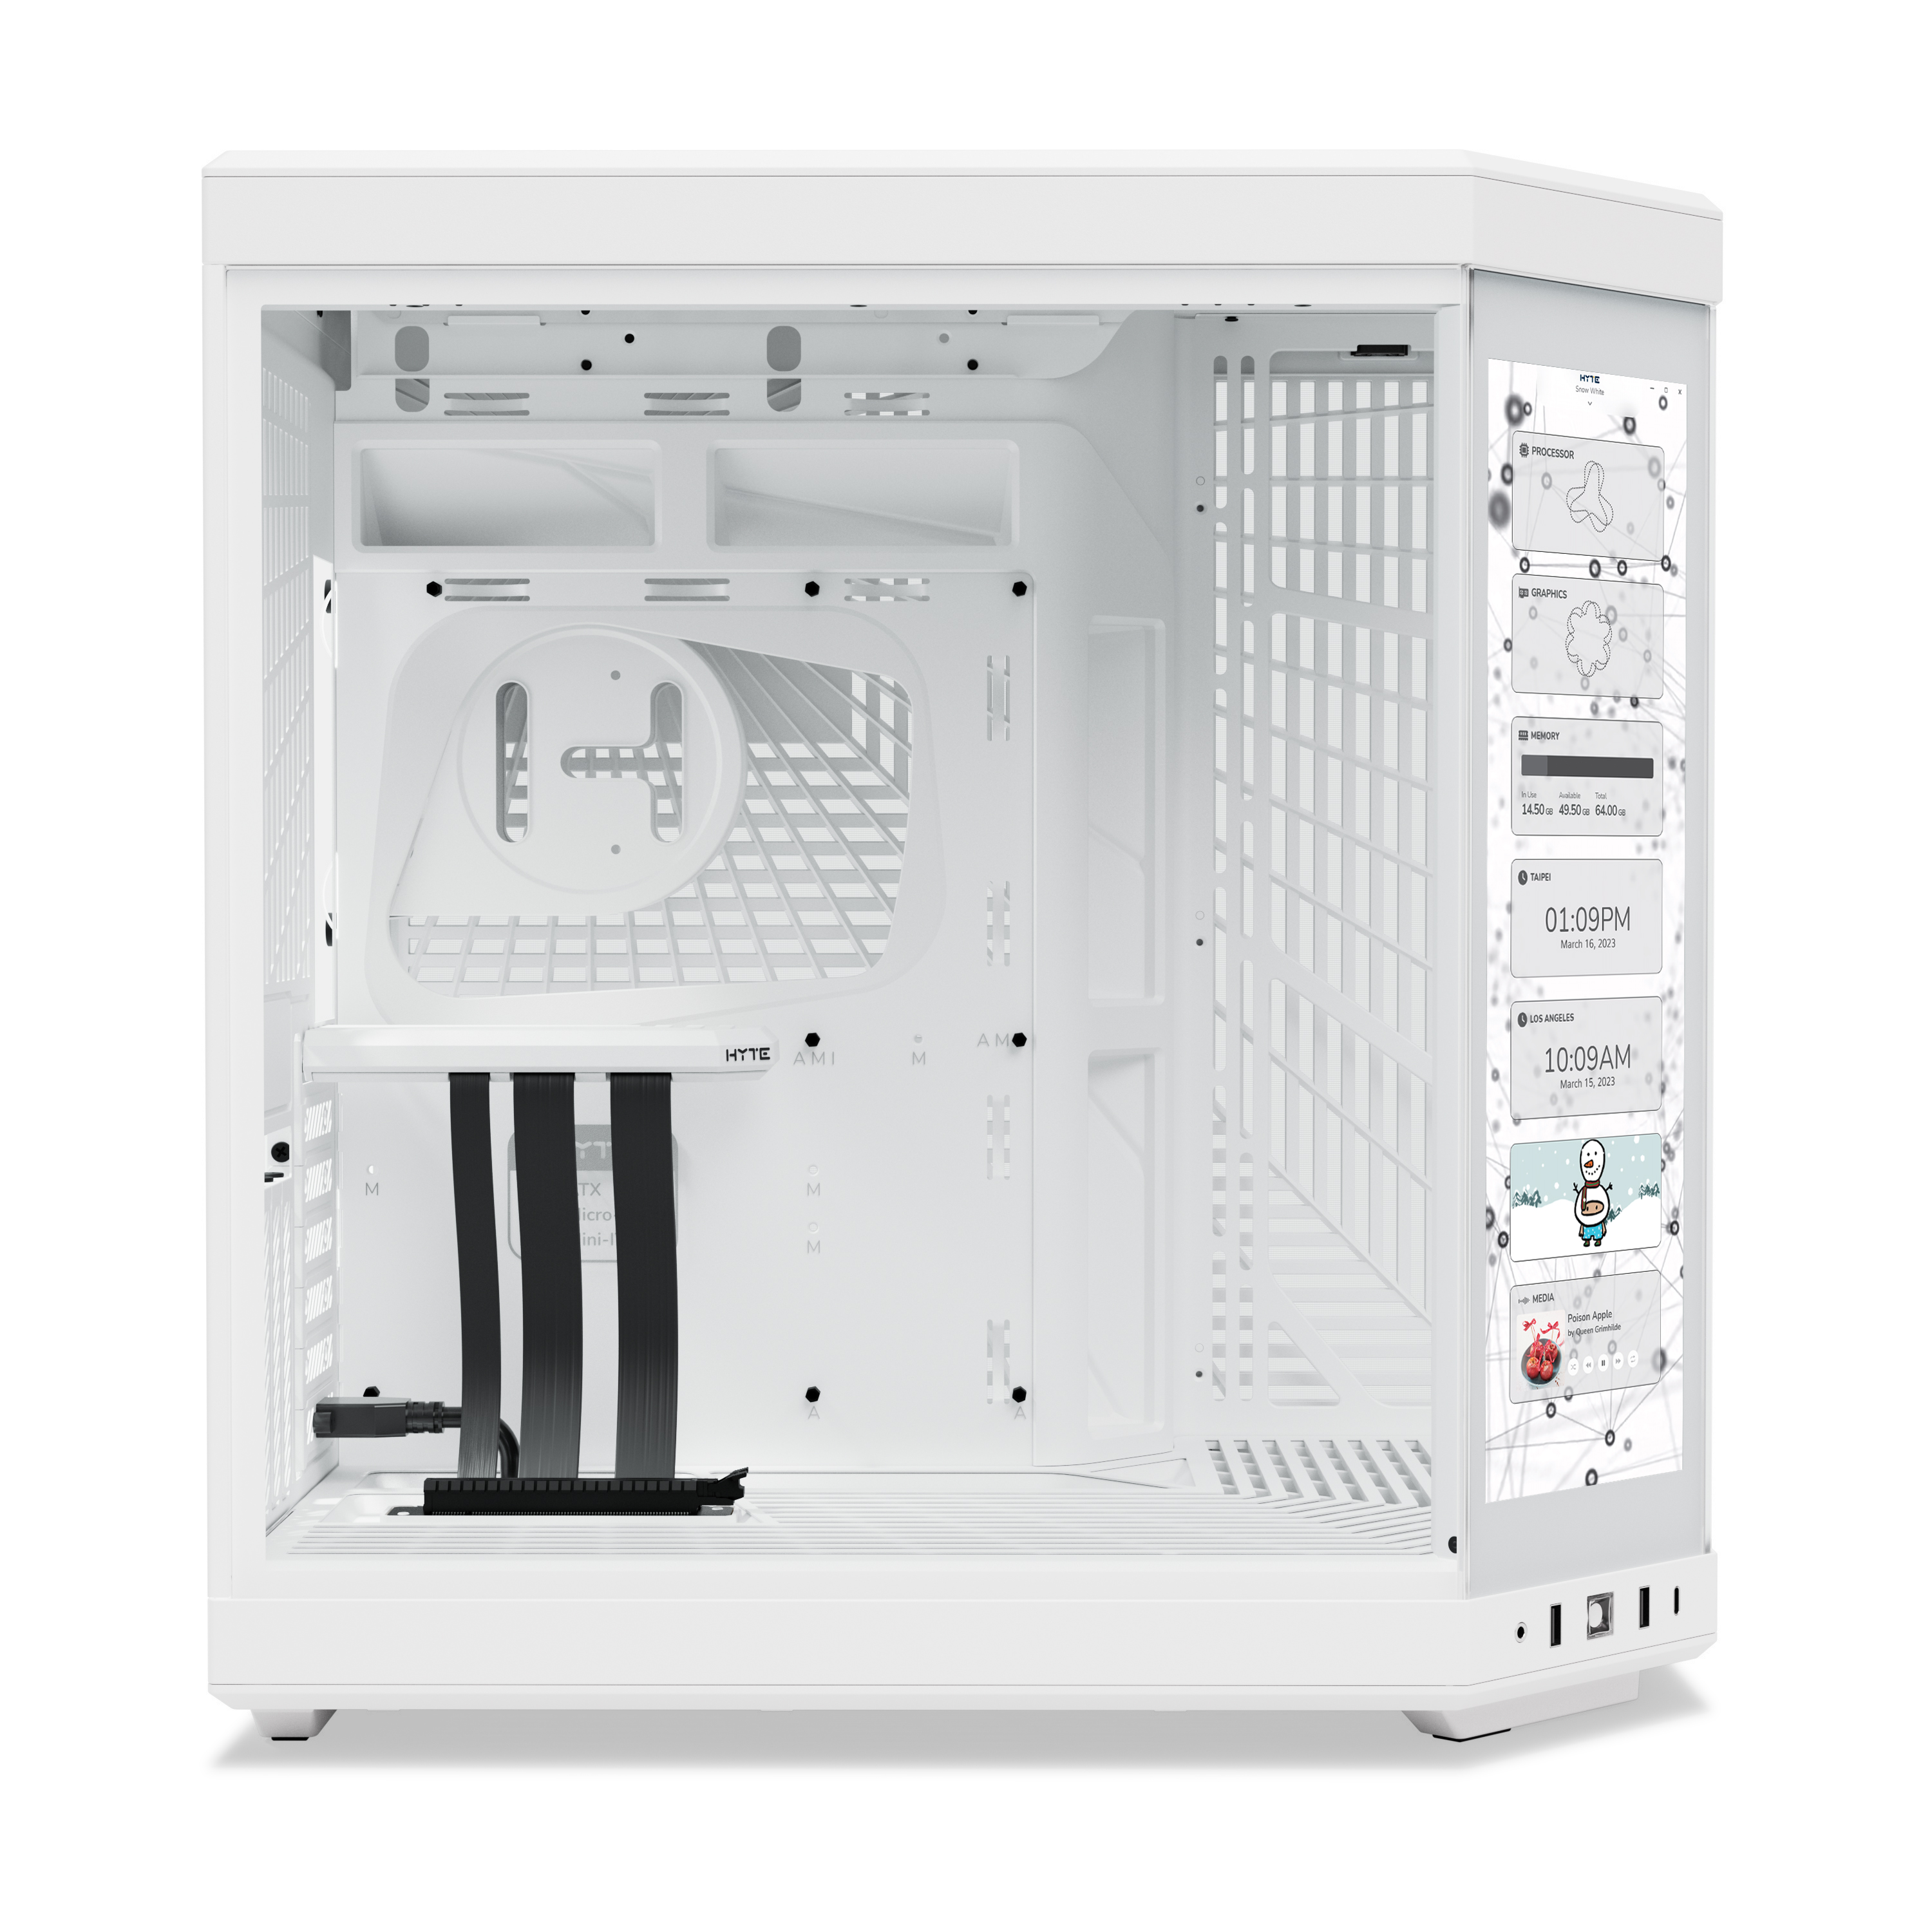 HYTE - Hyte Y70 Touch Dual Chamber Mid-Tower ATX Case - Snow White